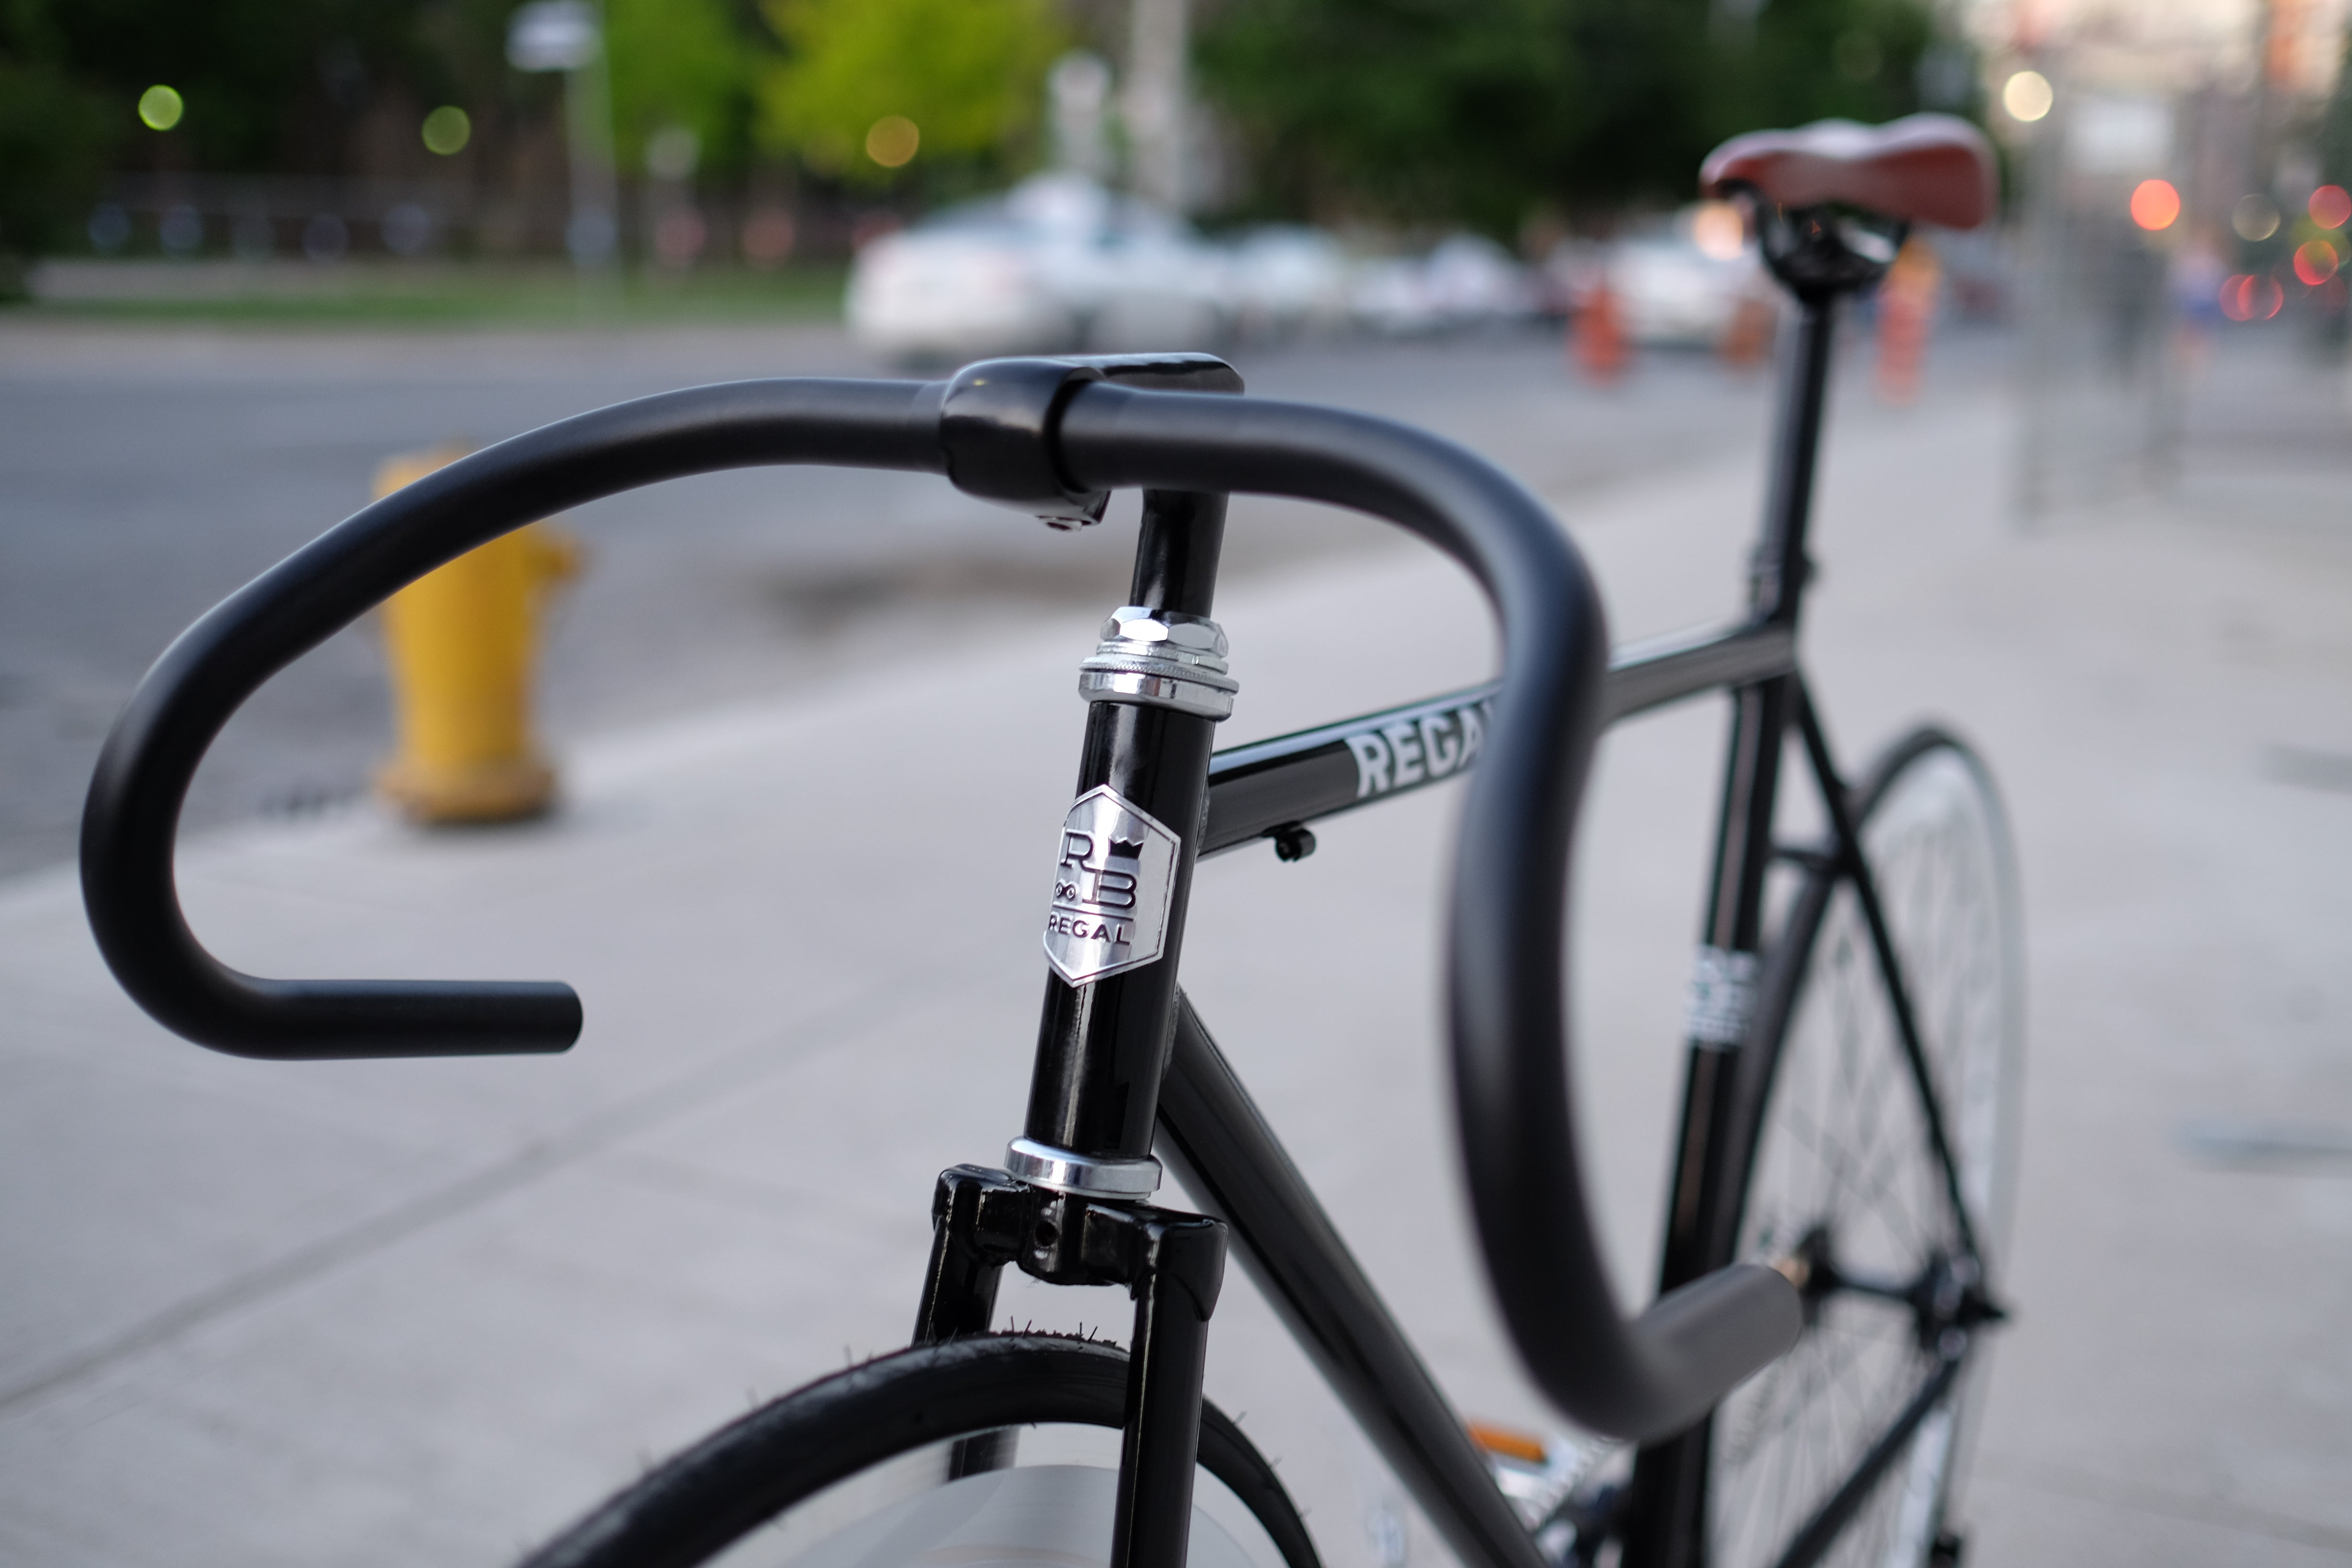 Duke Bicycle by Regal Bicyles - This Fixie bikes come with a black finish and white deep rims and drop handlebars